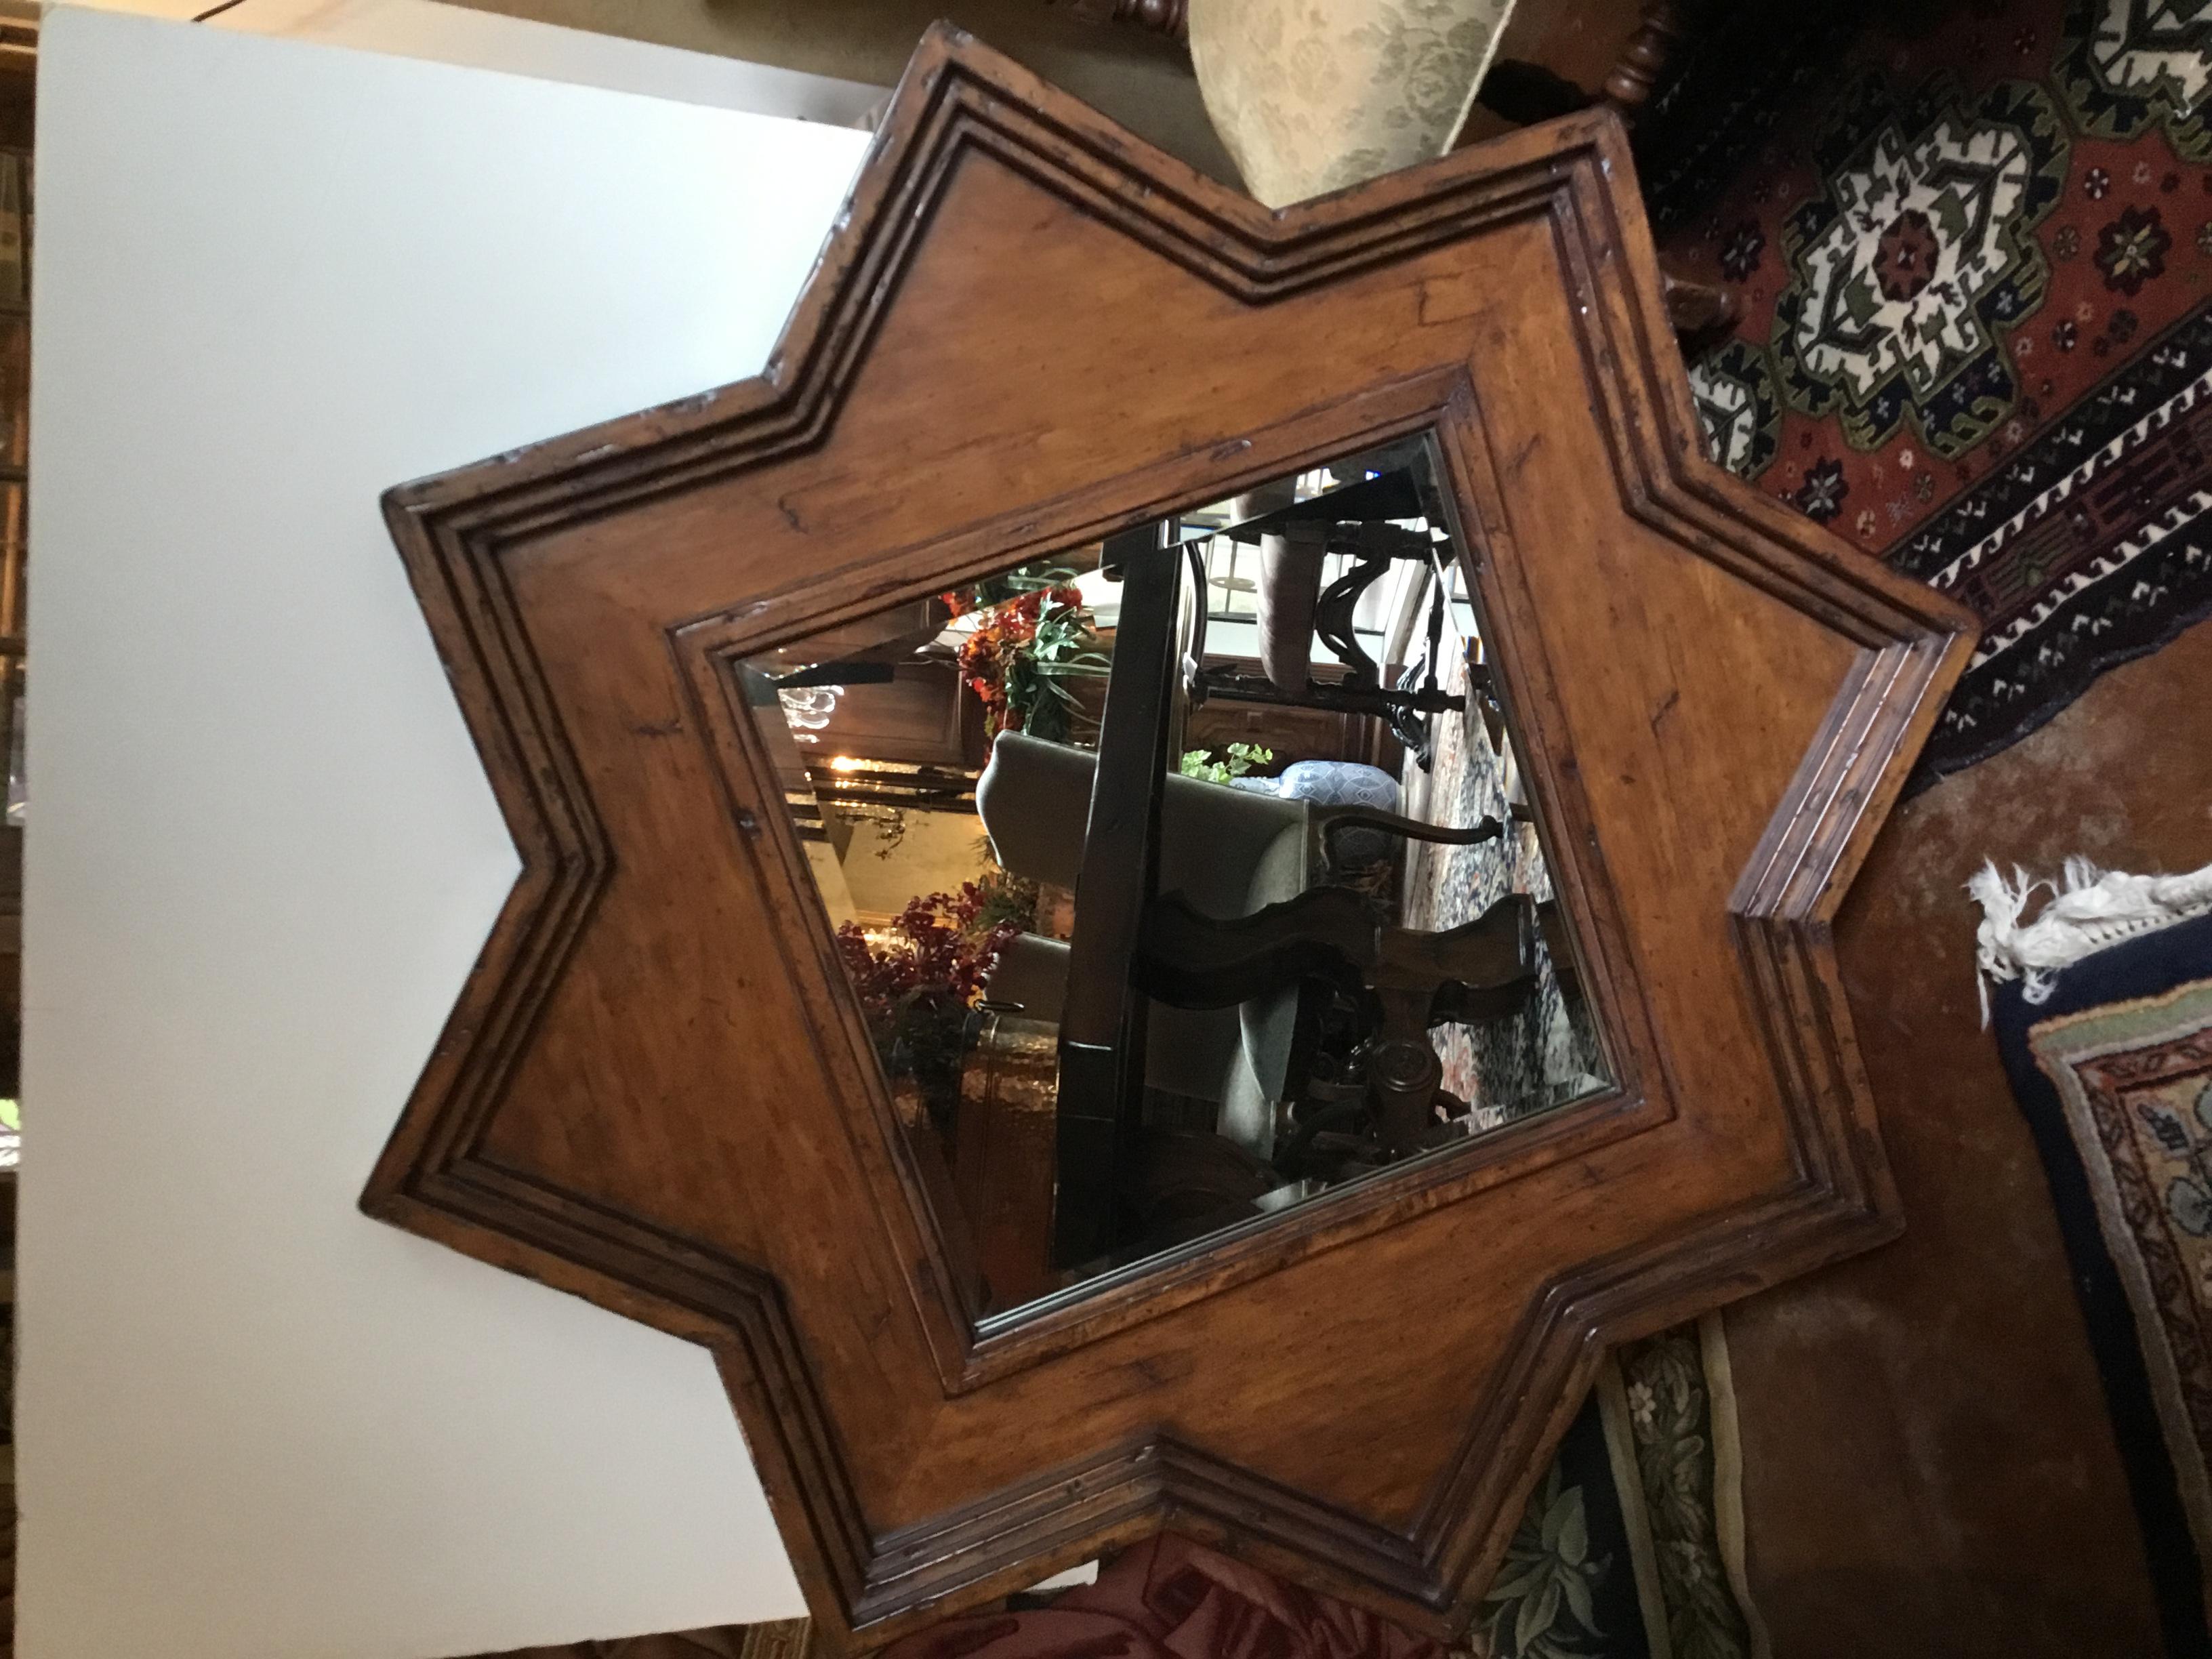 Handsome rustic look with a beveled mirror housed in a star shaped
frame. Great for farm house or cabin. The frame is made from reclaimed
timber. Eight sided star.